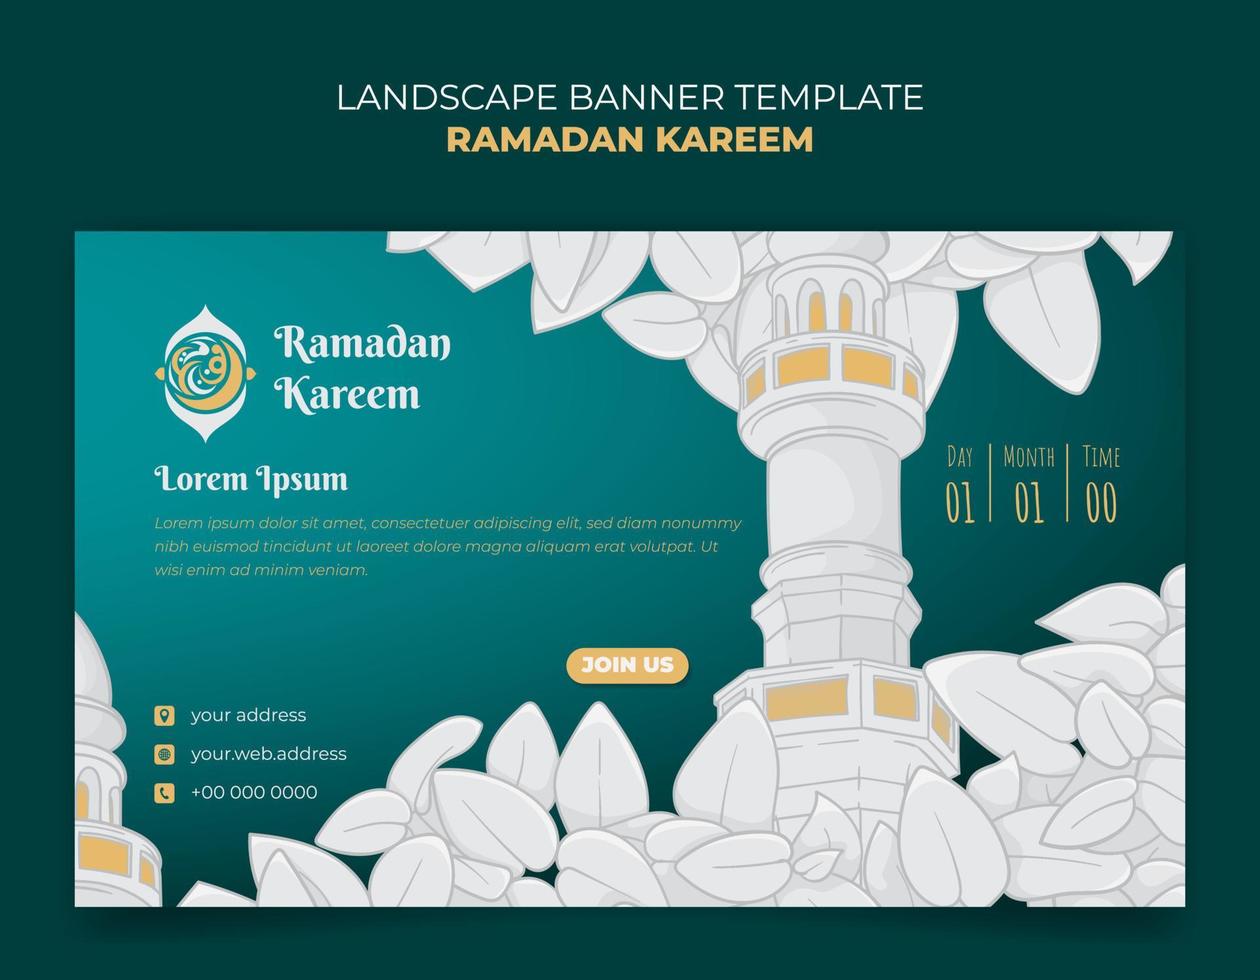 Ramadan kareem landscape banner with white mosque minaret and white leaves background design vector